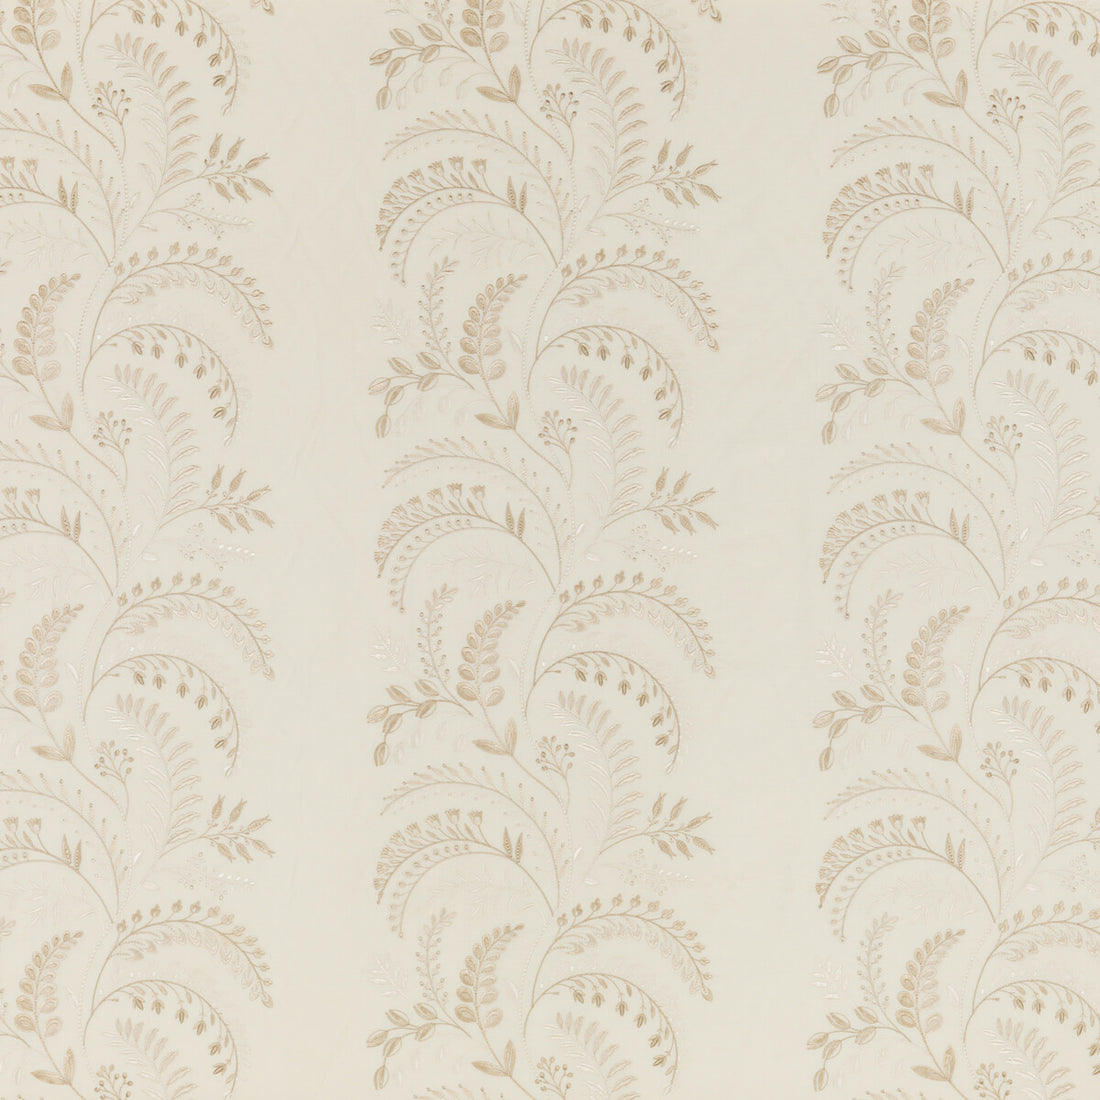 Pennington fabric in ivory color - pattern BF10779.1.0 - by G P &amp; J Baker in the Signature Prints collection